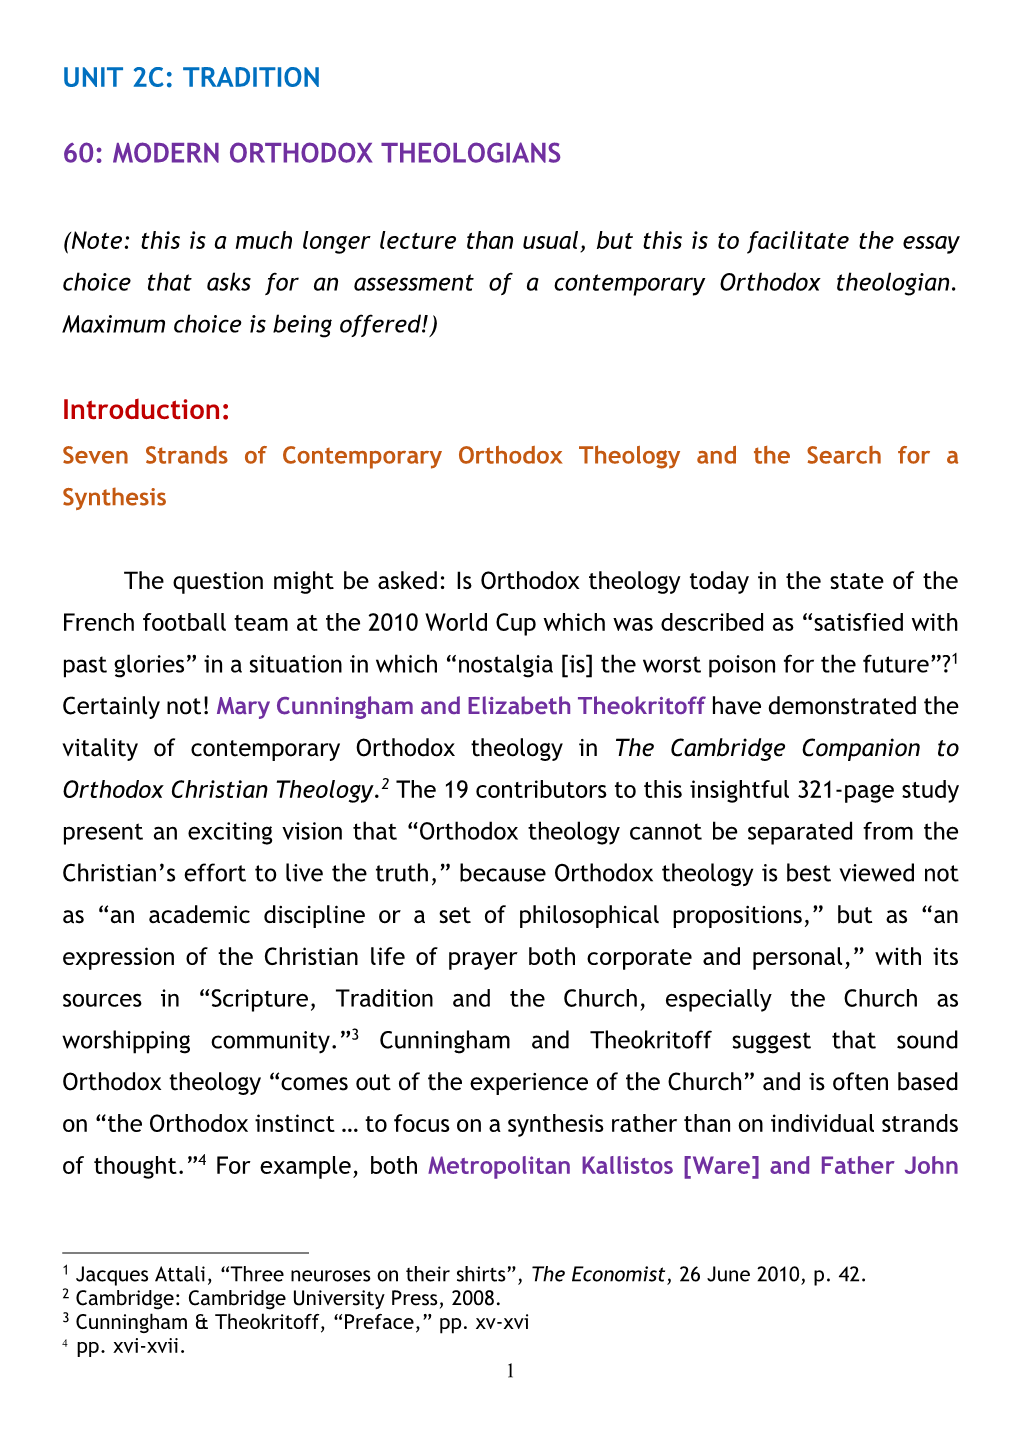 MODERN ORTHODOX THEOLOGIANS Introduction